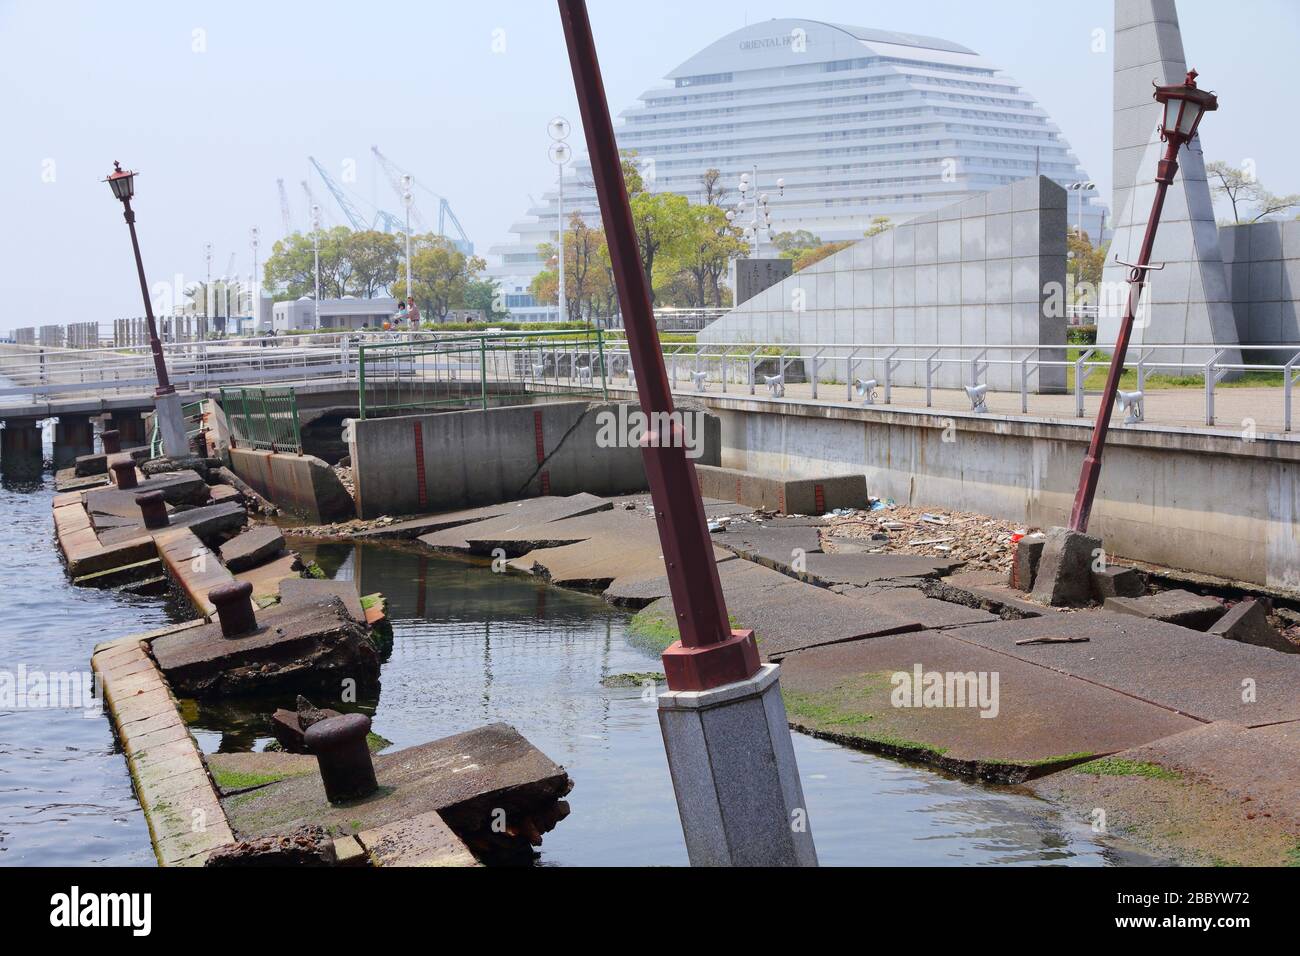 KOBE, JAPAN - APRIL 24, 2012: People visit the ruined Meriken Wharf in Kobe. It was damaged by the Great Hanshin Earthquake in 1995 and is preserved a Stock Photo